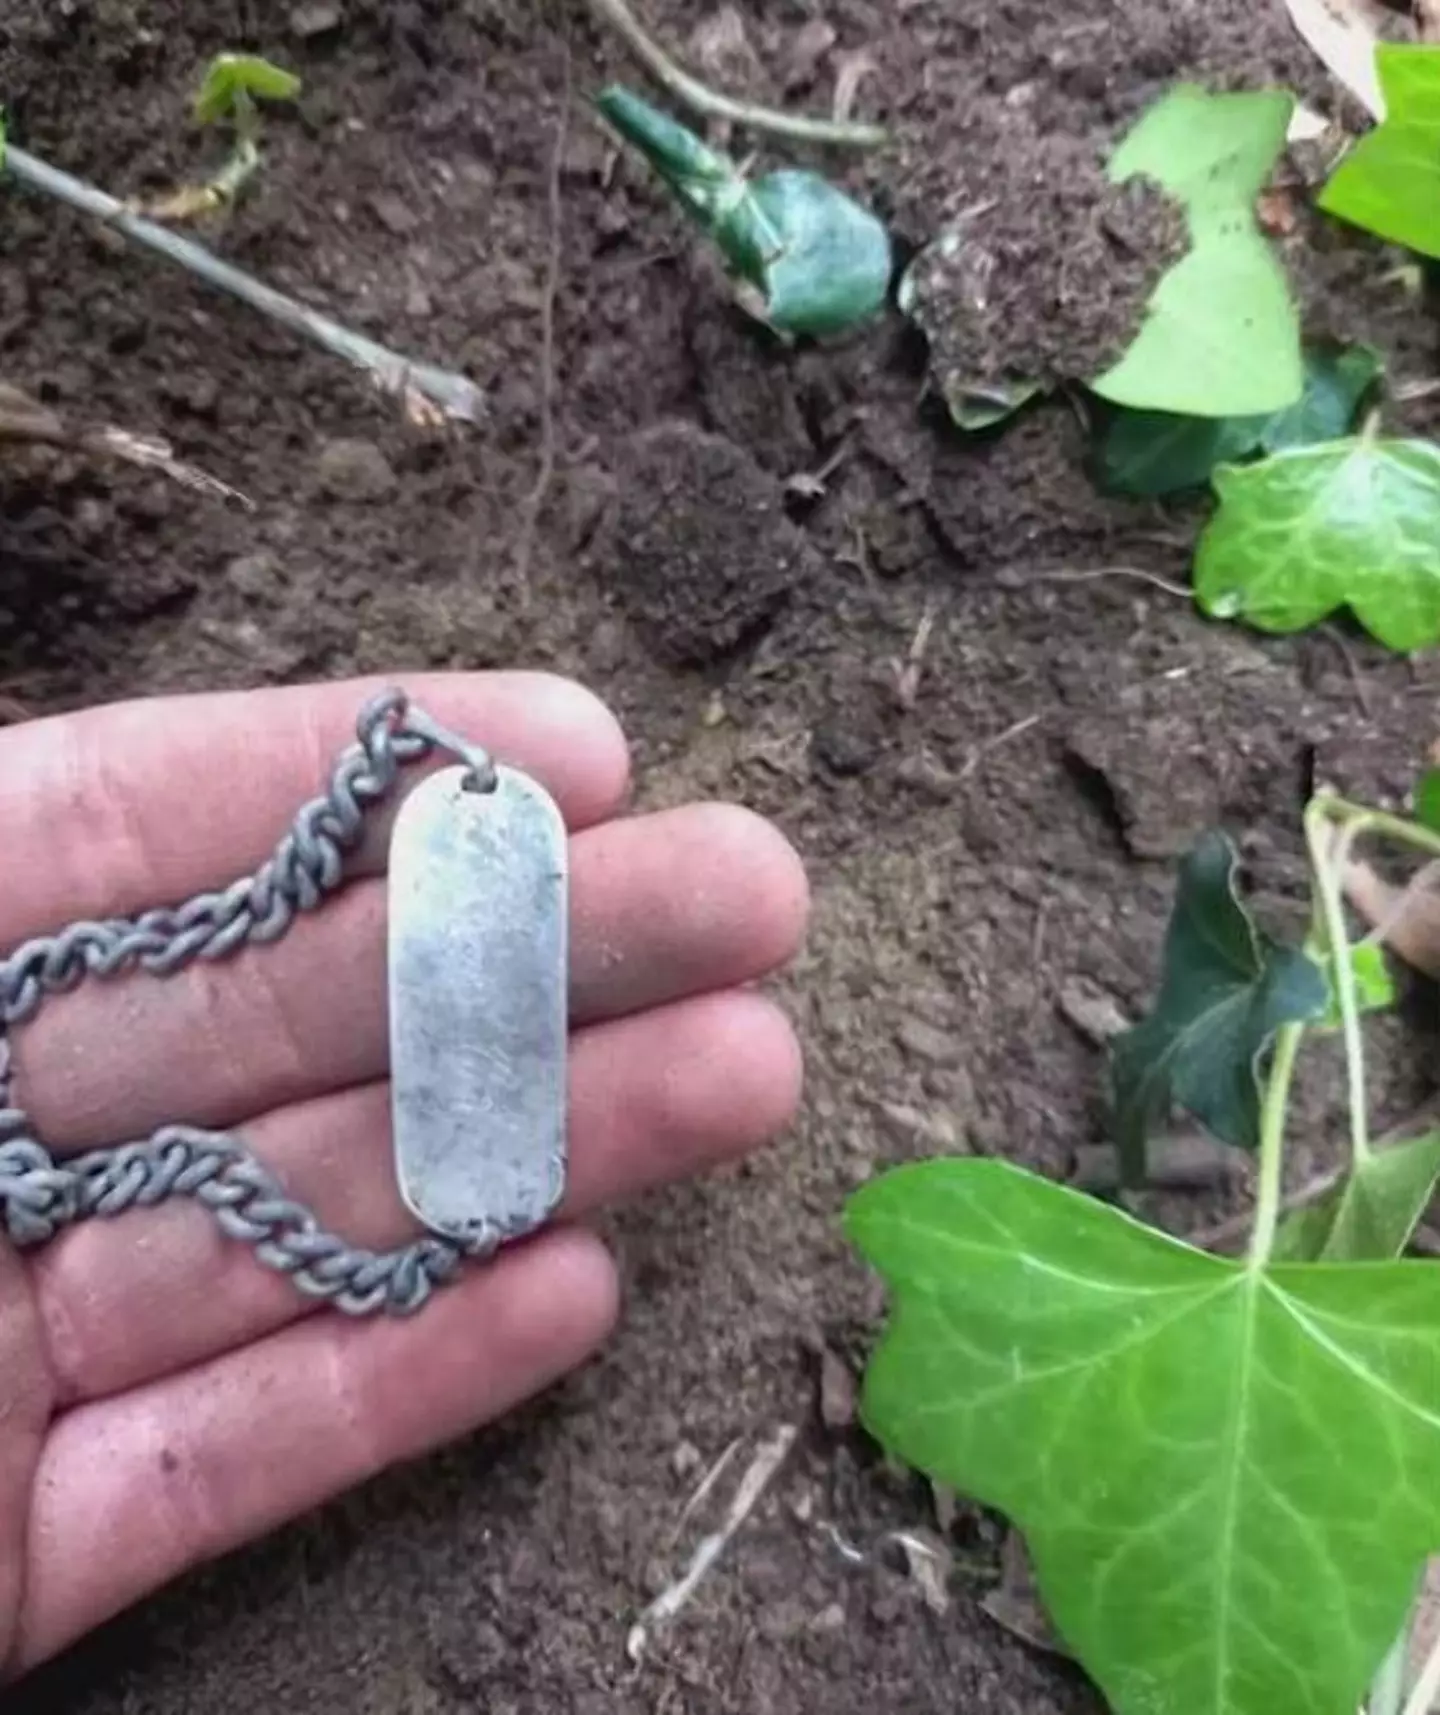 The bracelet was found buried in a forest near Pisa, Italy.